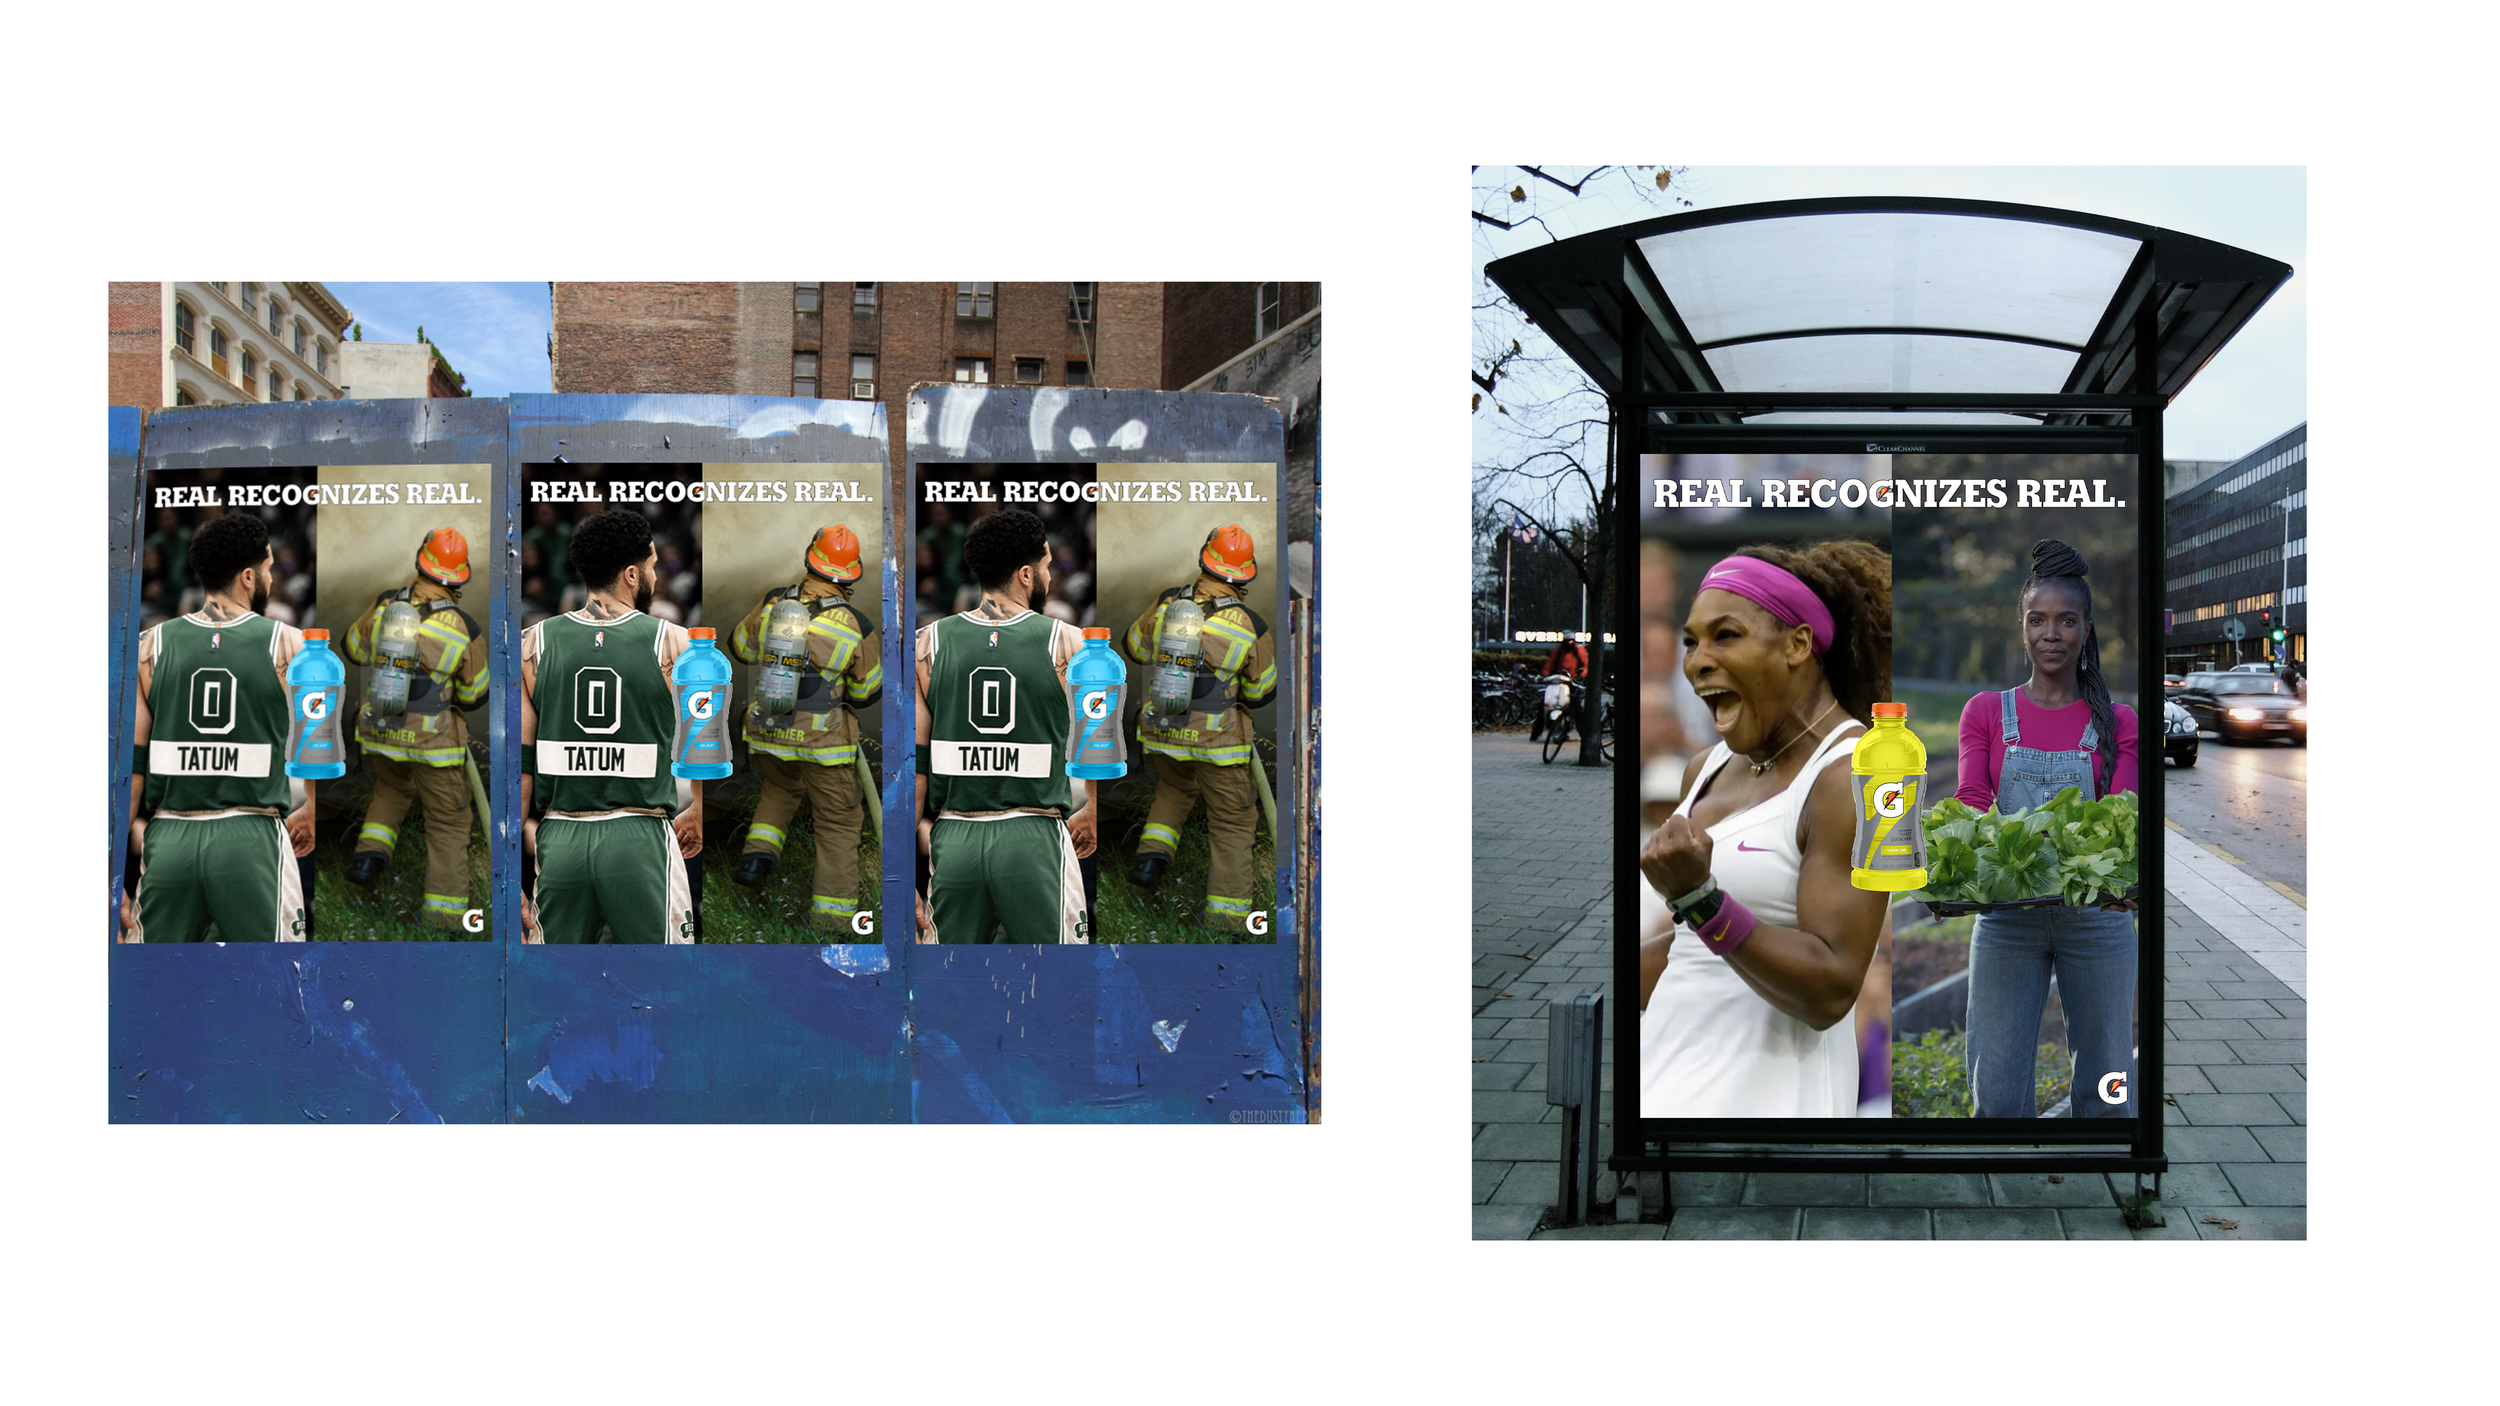  By using OOH we will show the similarities of professional athletes and every day people. Averaging 30 points per game or winning 23 Grand Slam women’s titles takes skill, perseverance, and hydration. The same can be said for being a firefighter or 